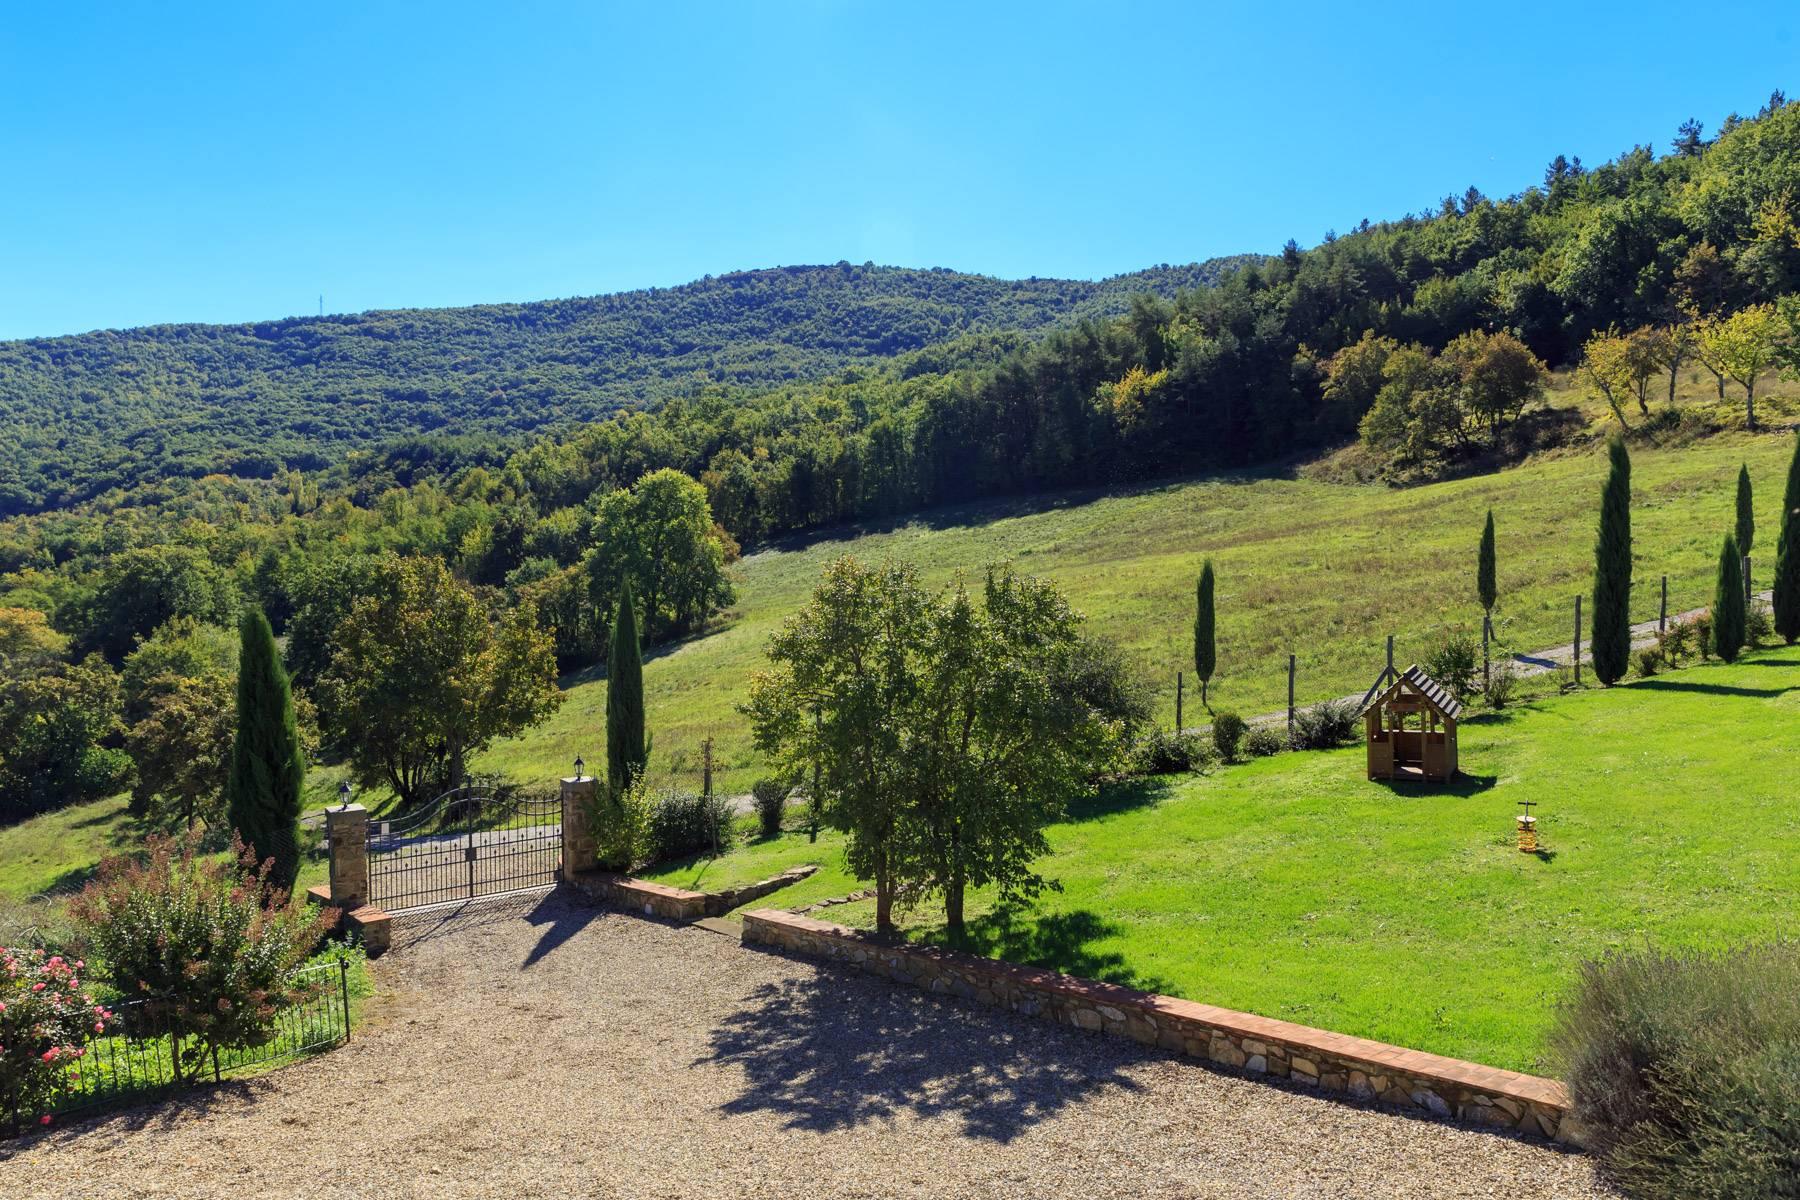 Marvelous estate with views over the Casentino valley - 35